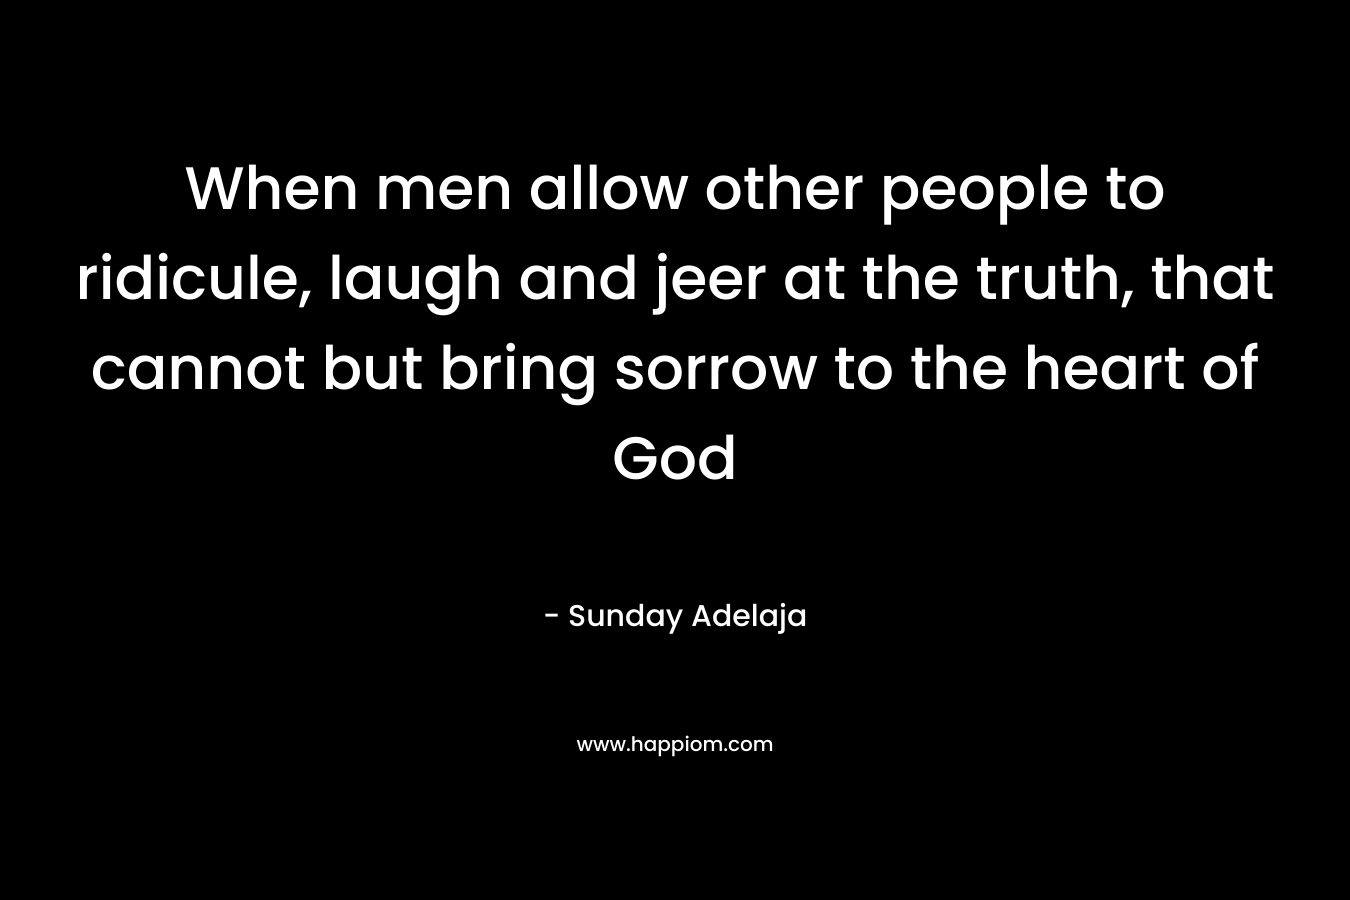 When men allow other people to ridicule, laugh and jeer at the truth, that cannot but bring sorrow to the heart of God